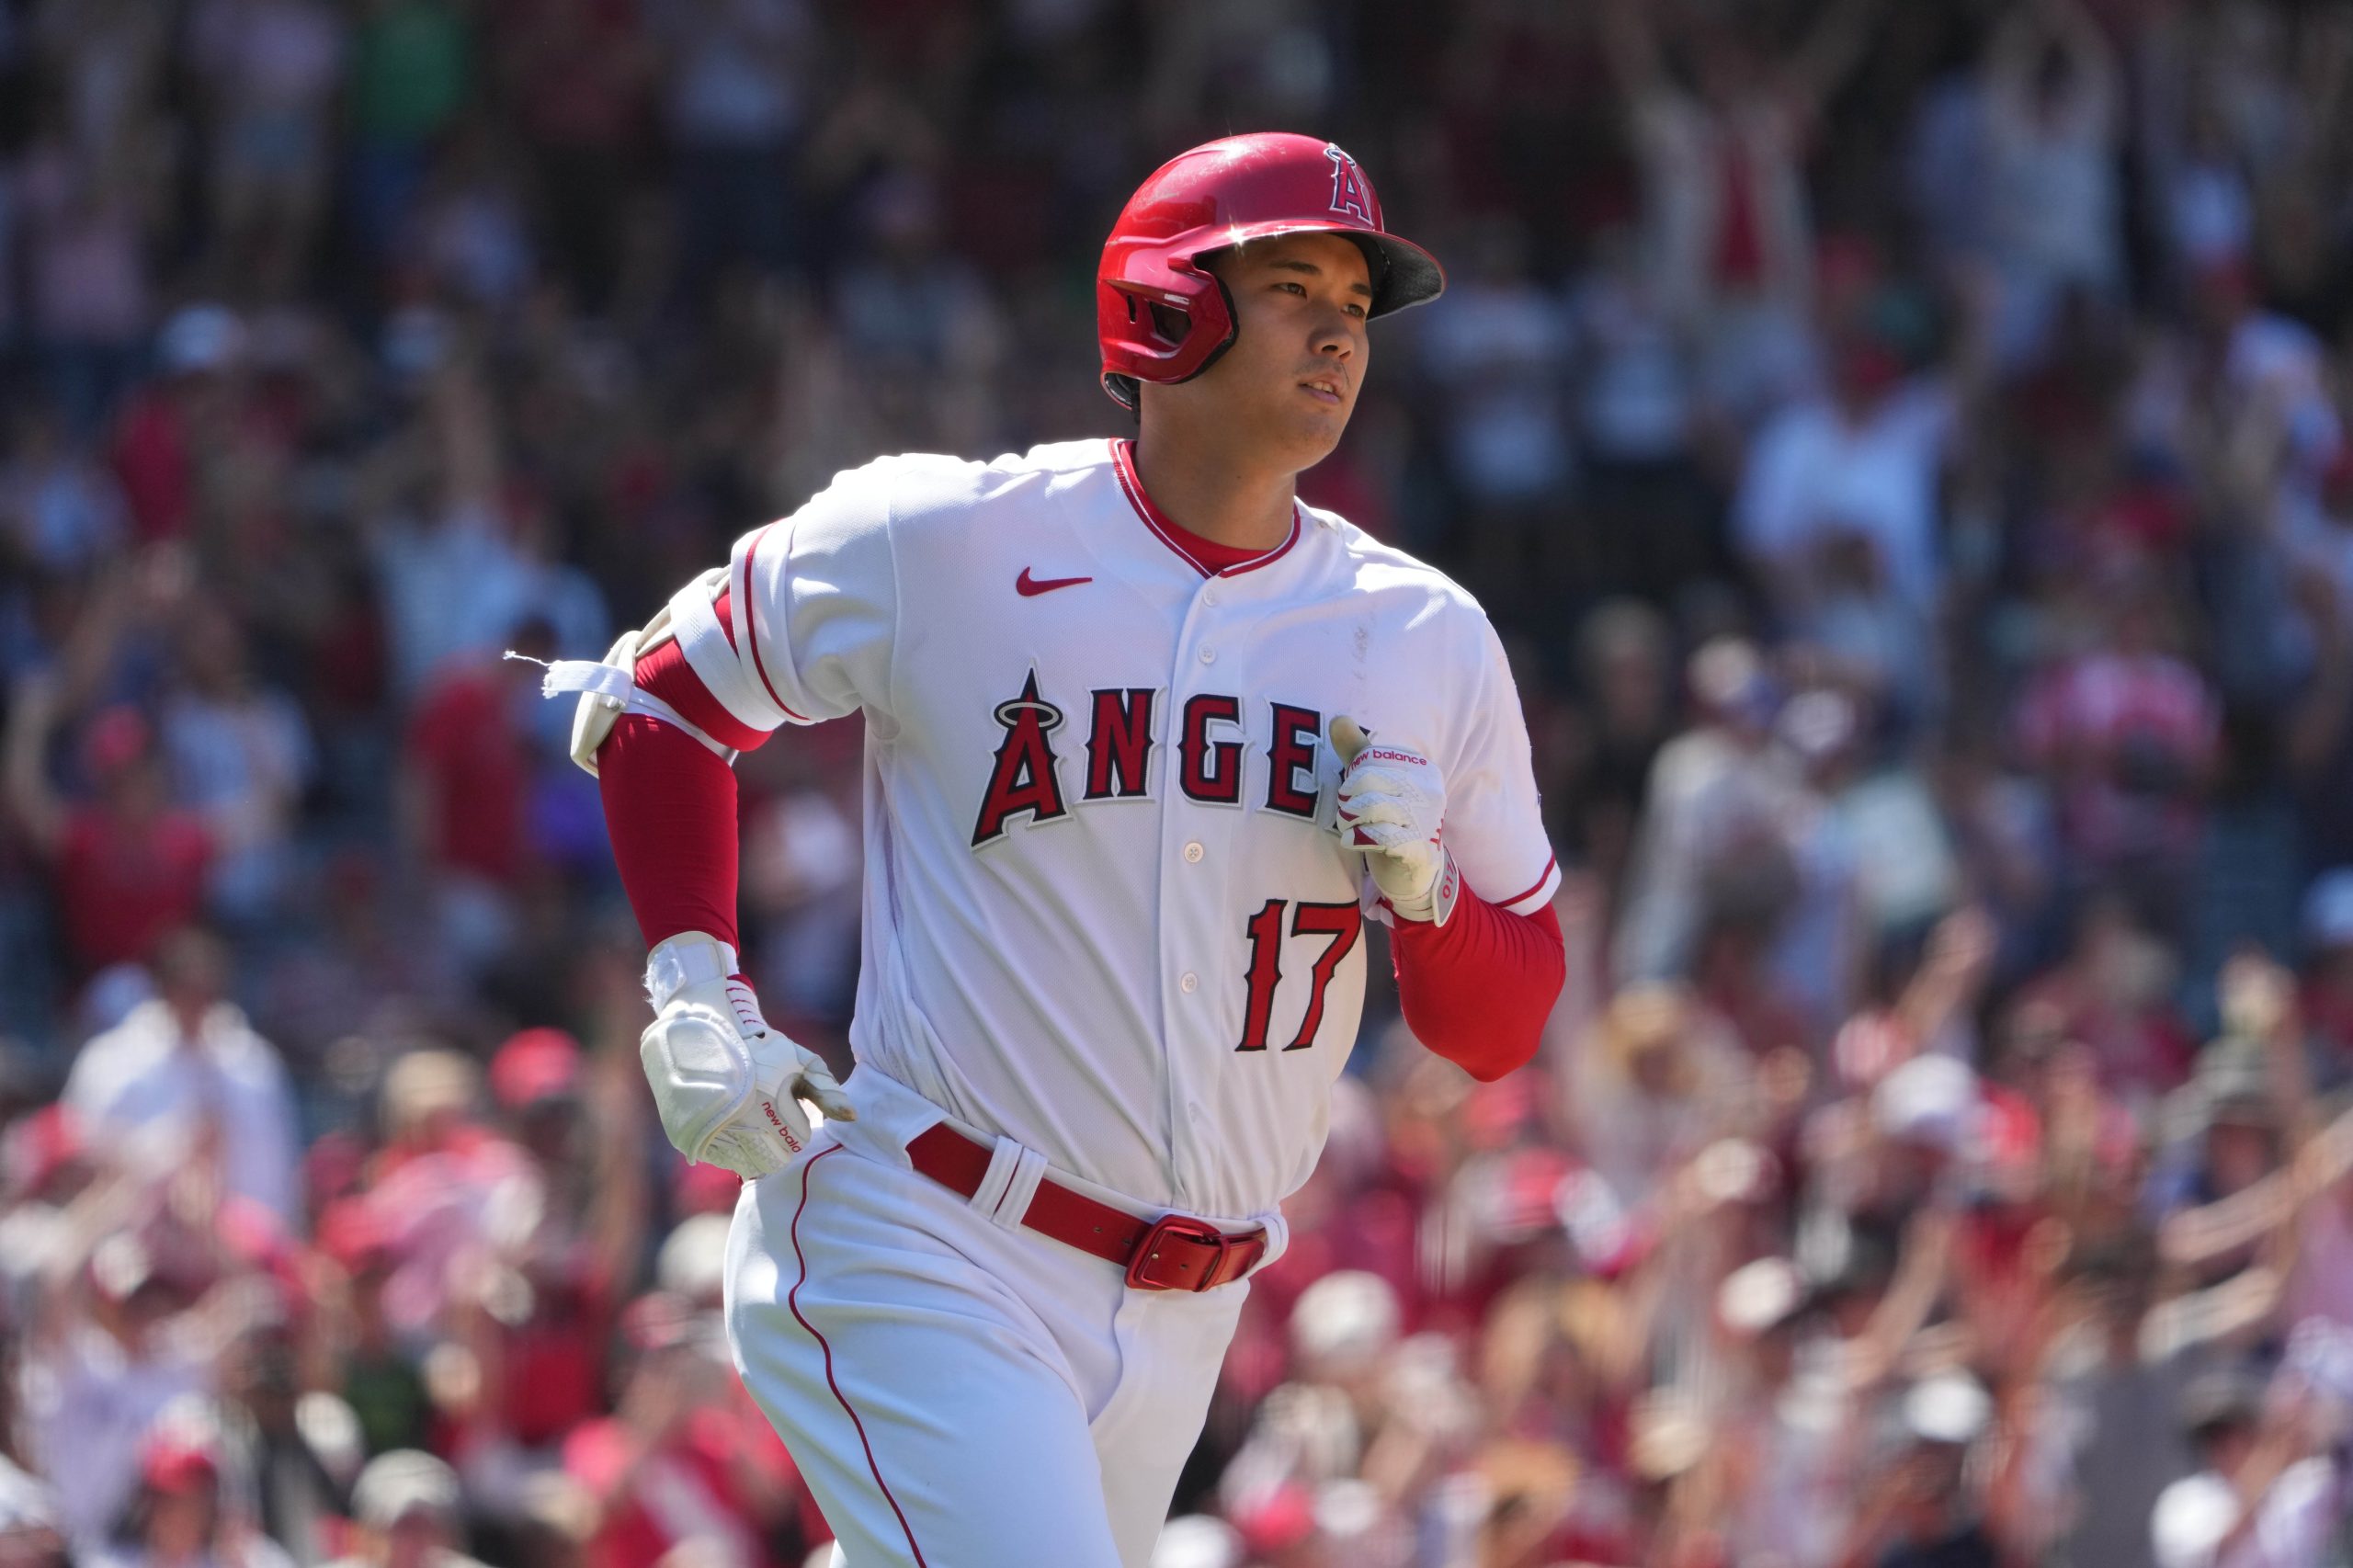 Mike Trout, Shohei Ohtani All-Star Game status